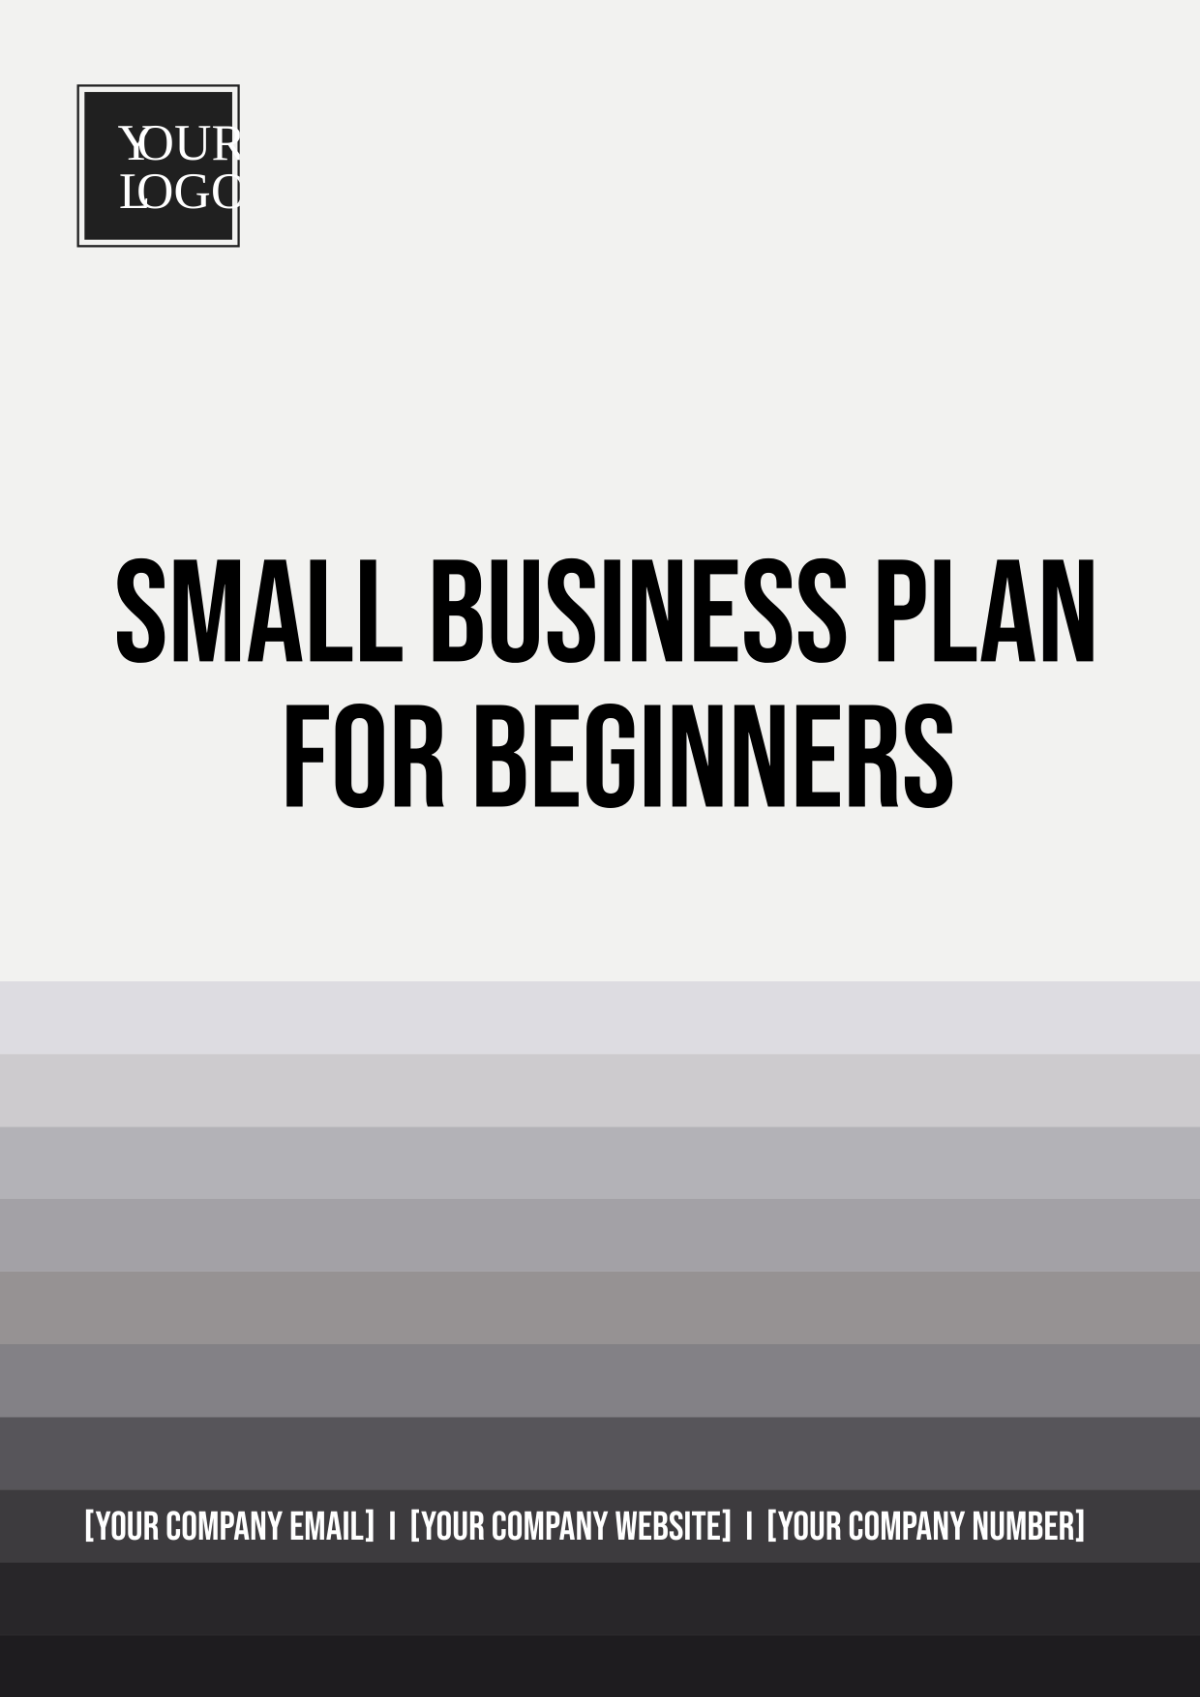 Small Business Plan for Beginners Template